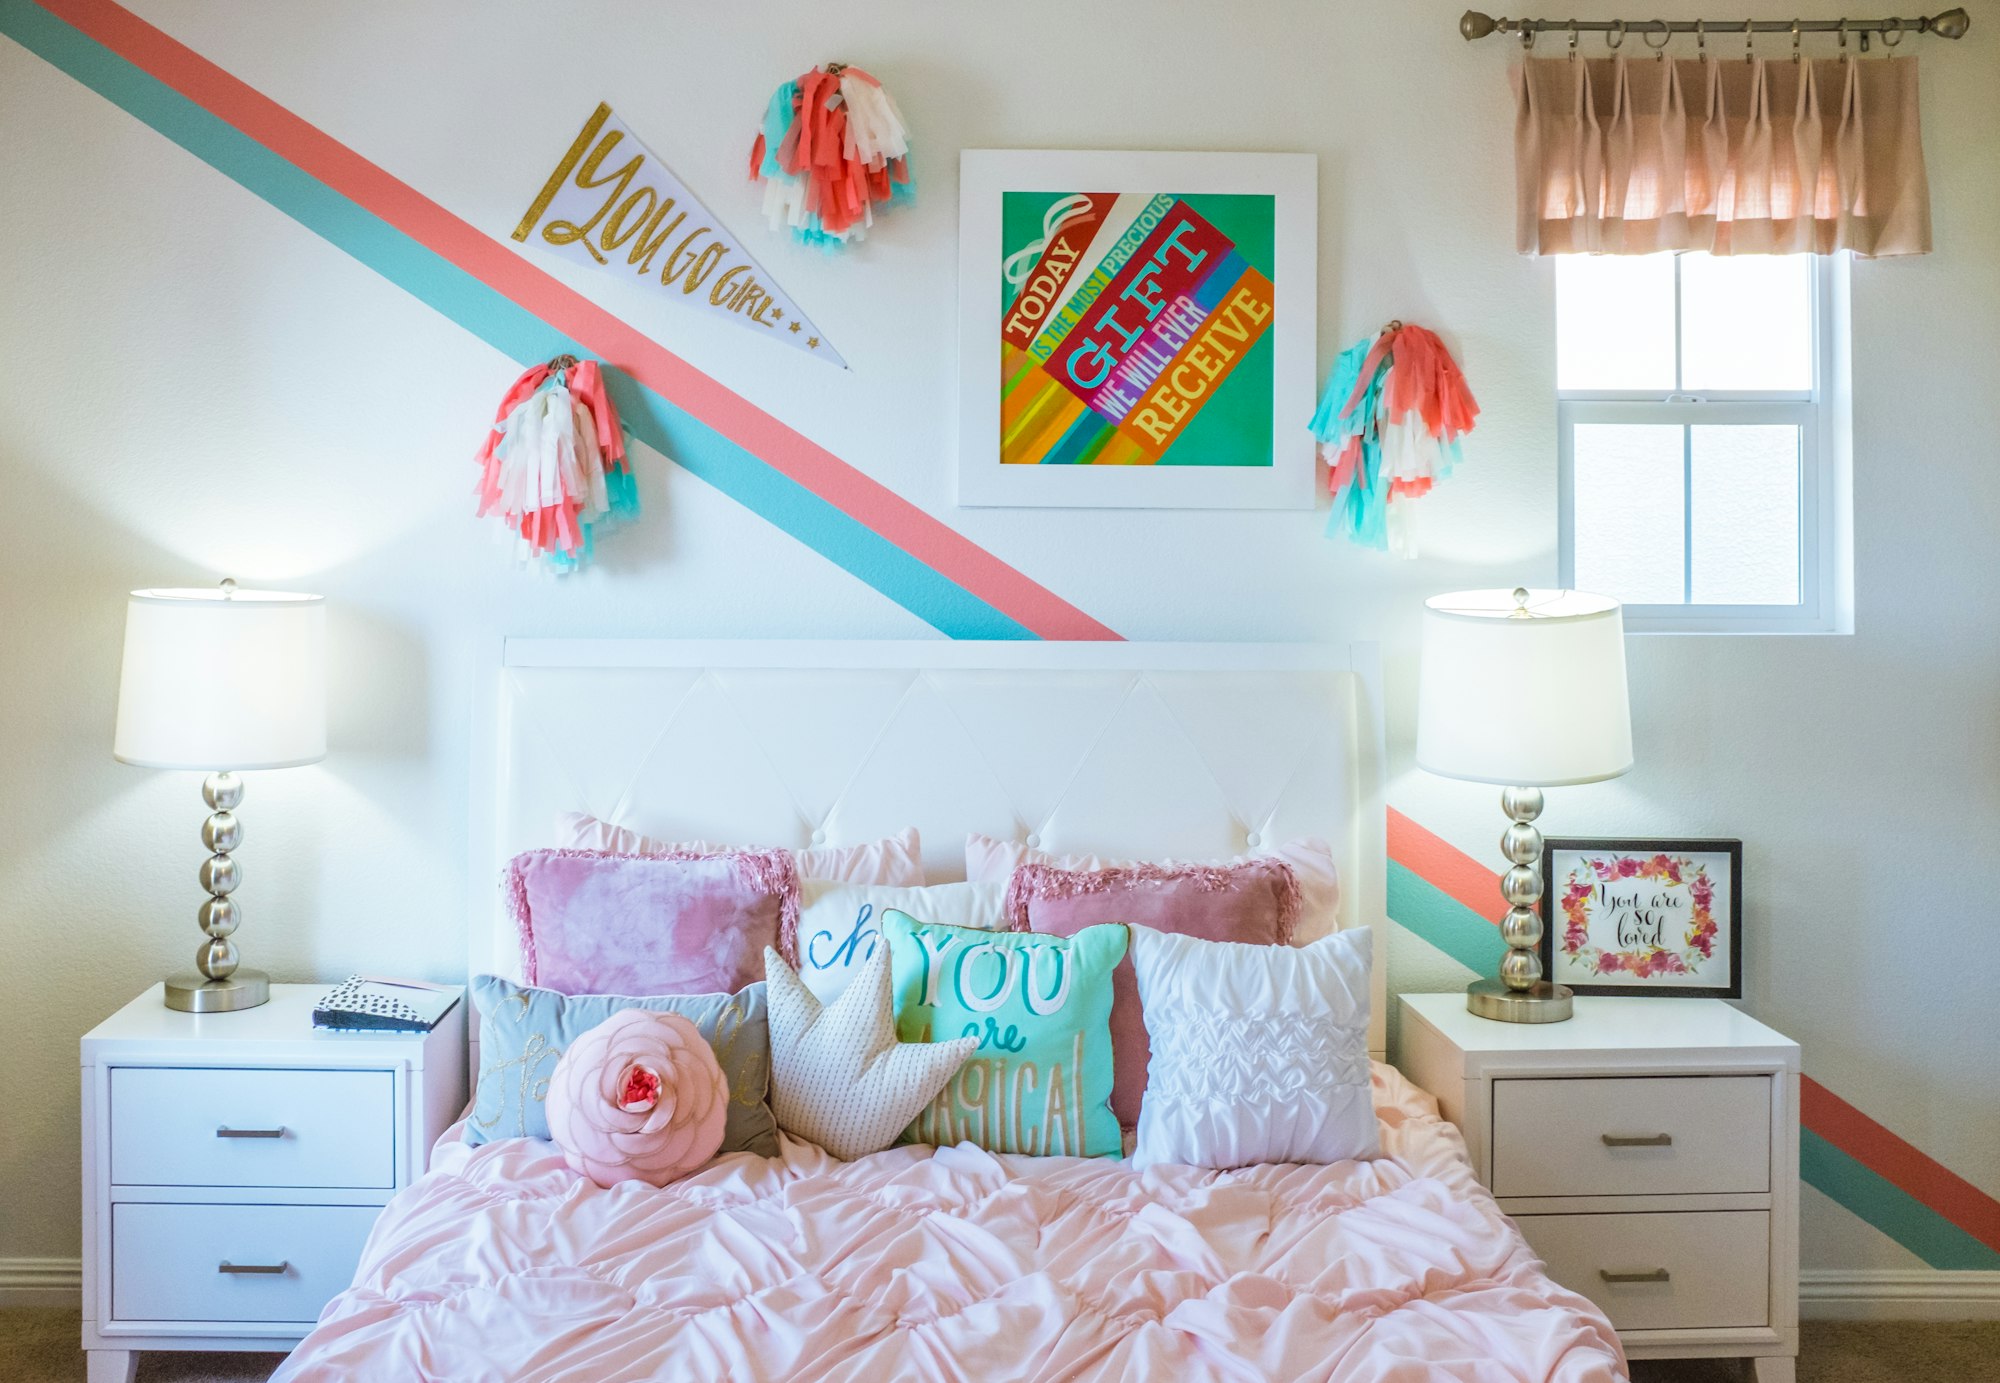 5 Tips and tricks for decorating a child's room